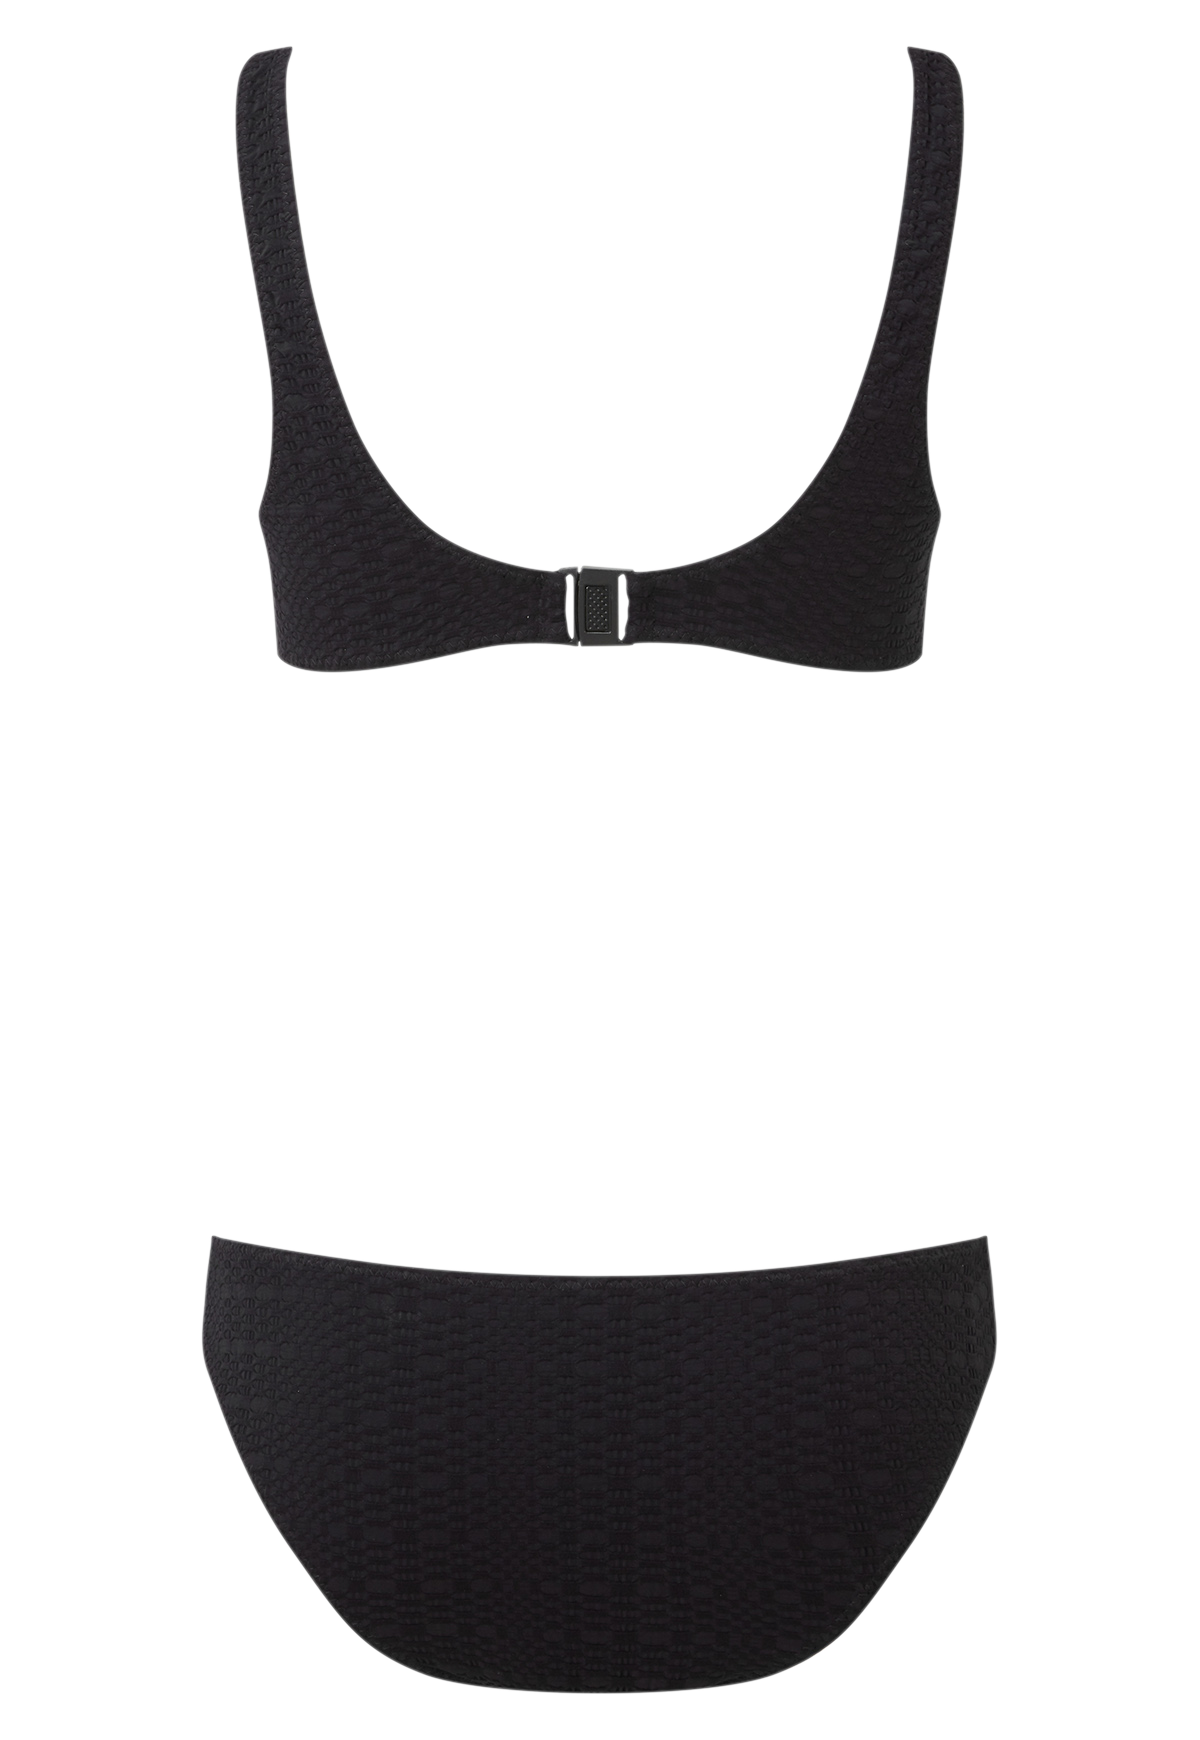 THE SCALLOP CUT-OUT MAILLOT in BLACK SEERSUCKER